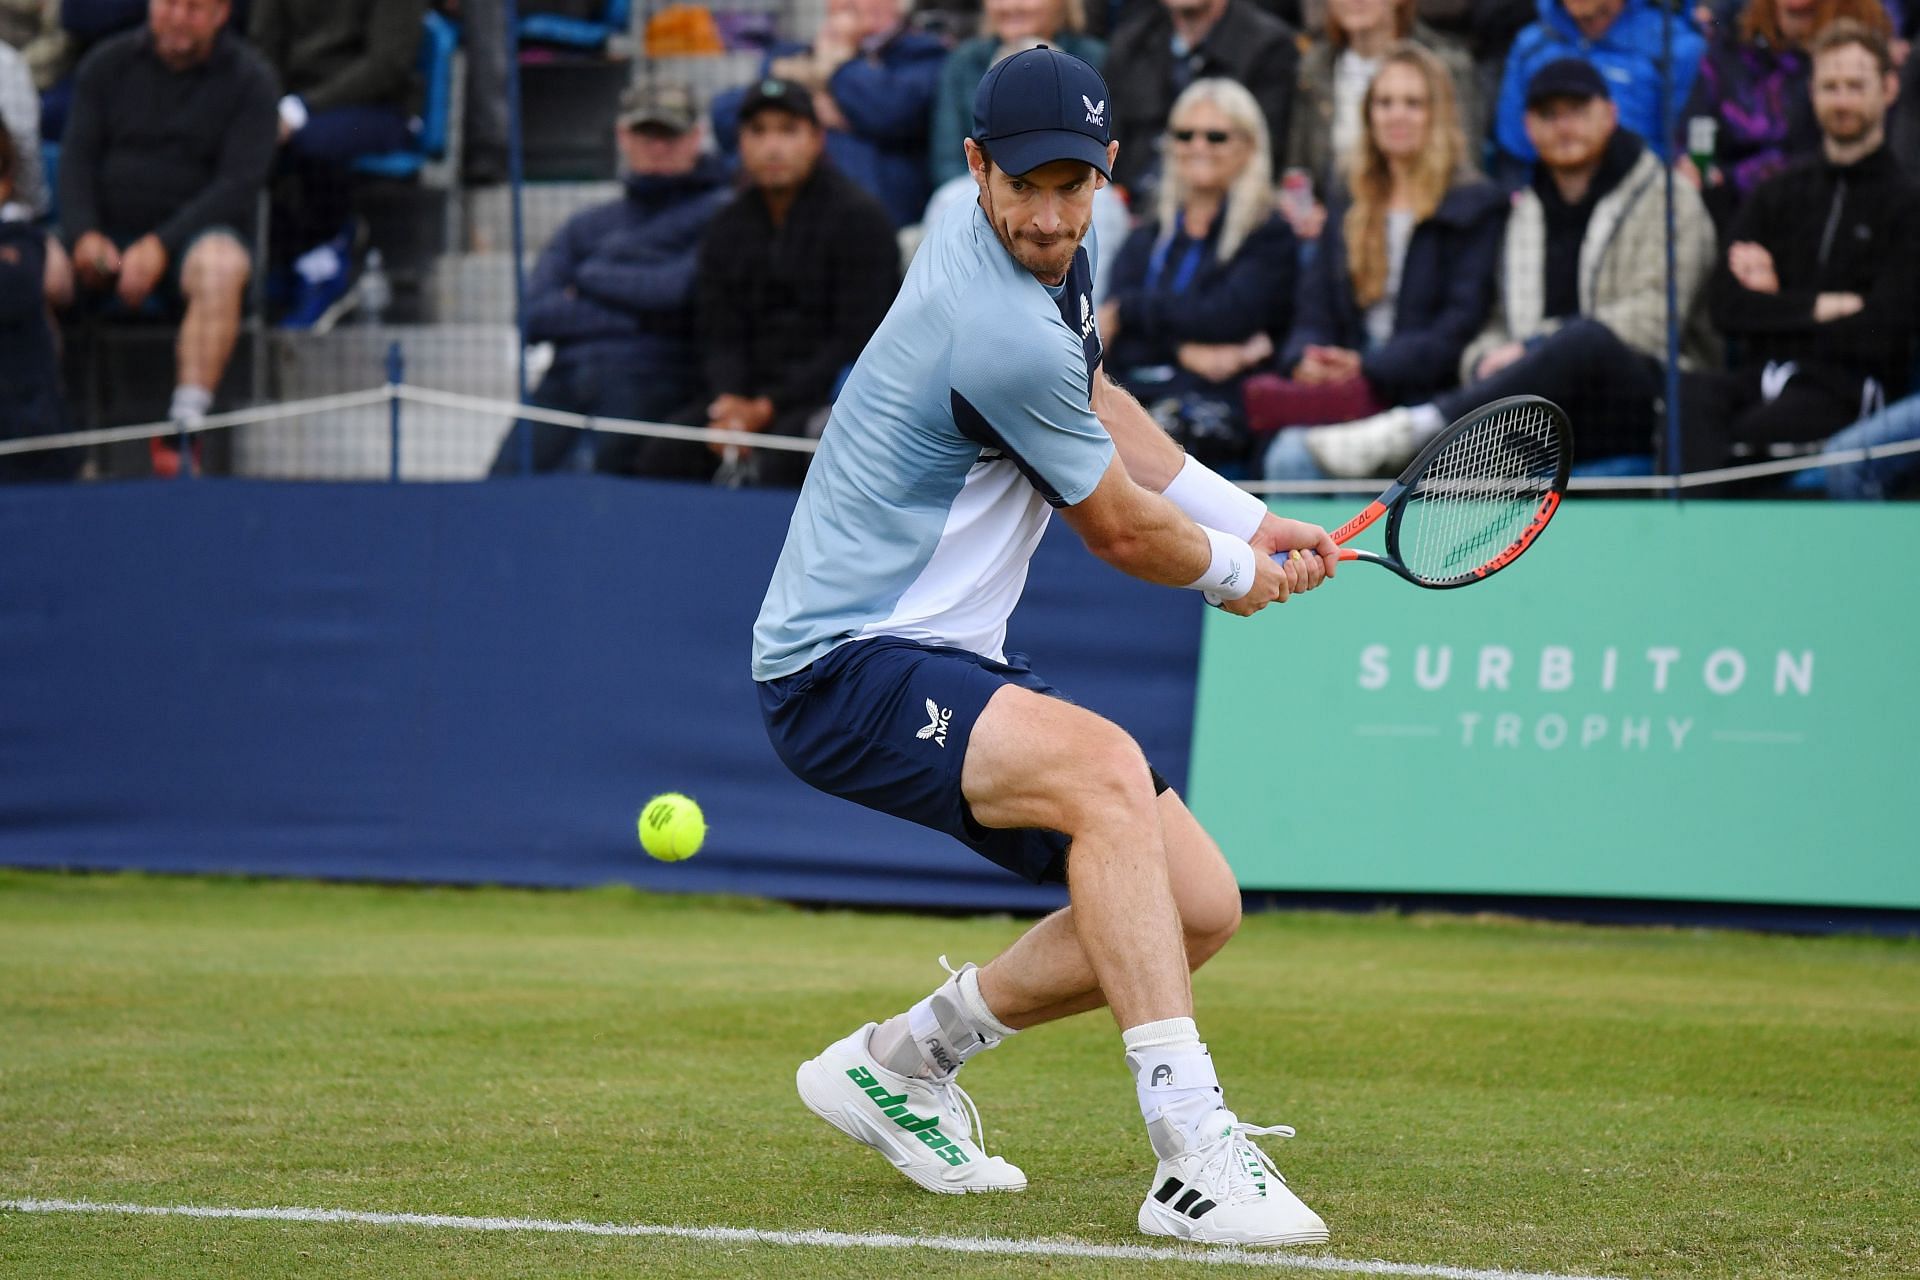 Andy Murray plays Gijs Brouwer in the second round of the Surbiton Trophy today following a convincing win in the opener